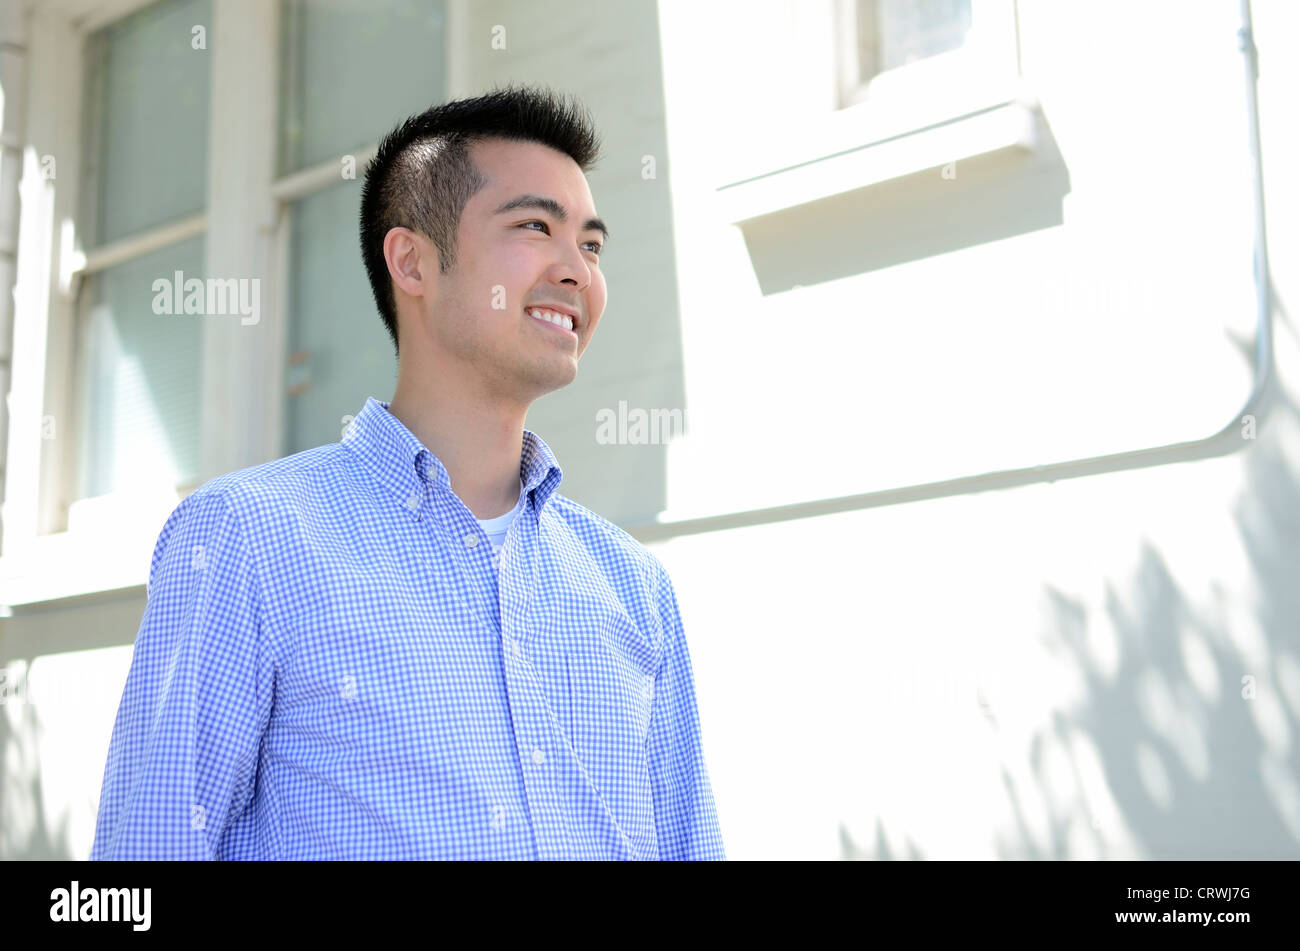 Head shot of a young Asian man smiling taken from a low angle Stock Photo